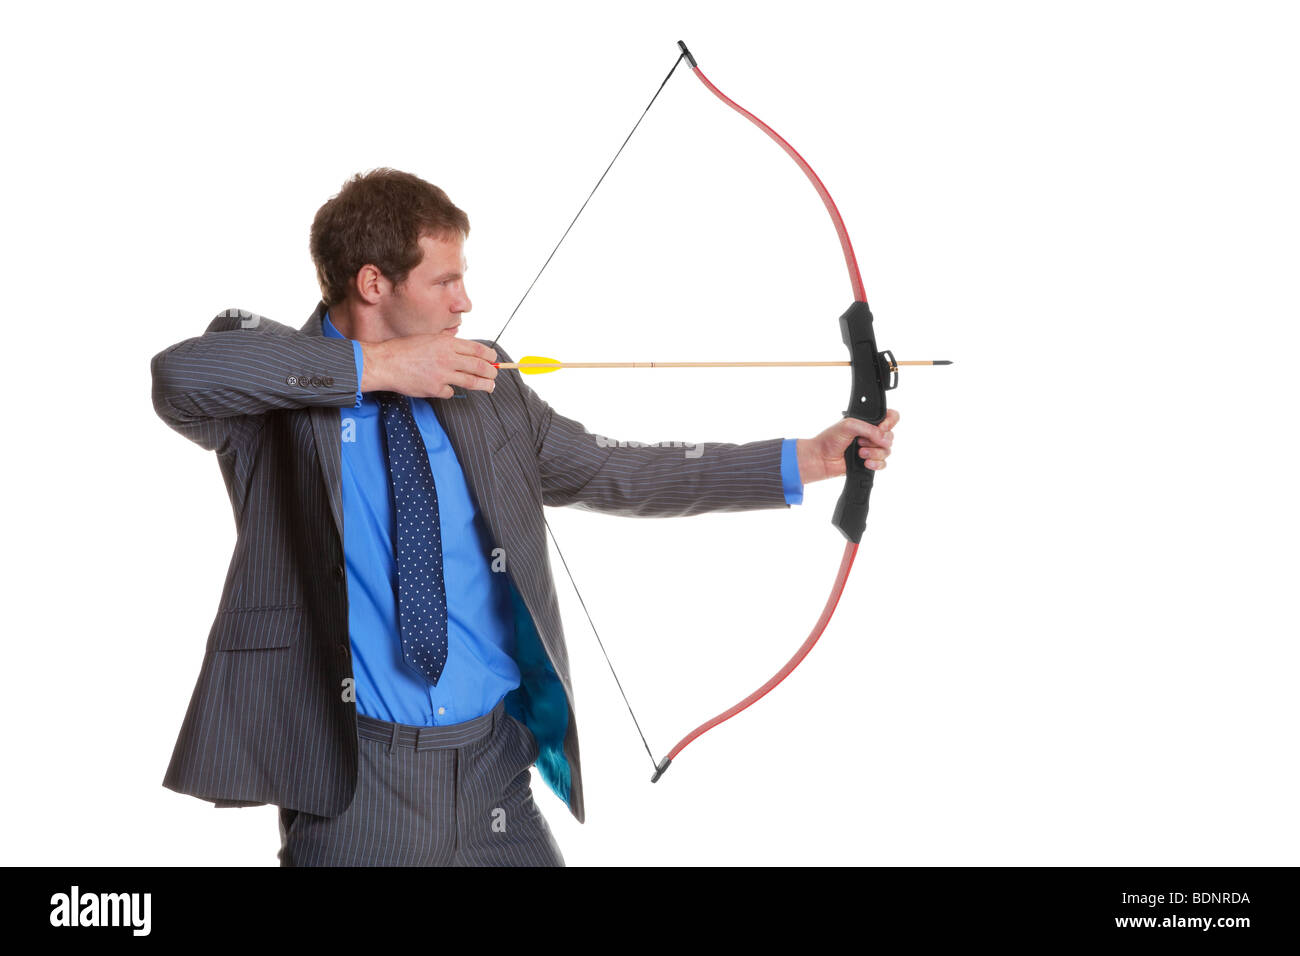 Businessman in pinstripe suit shooting a bow and arrow, isolated on a white background. Stock Photo